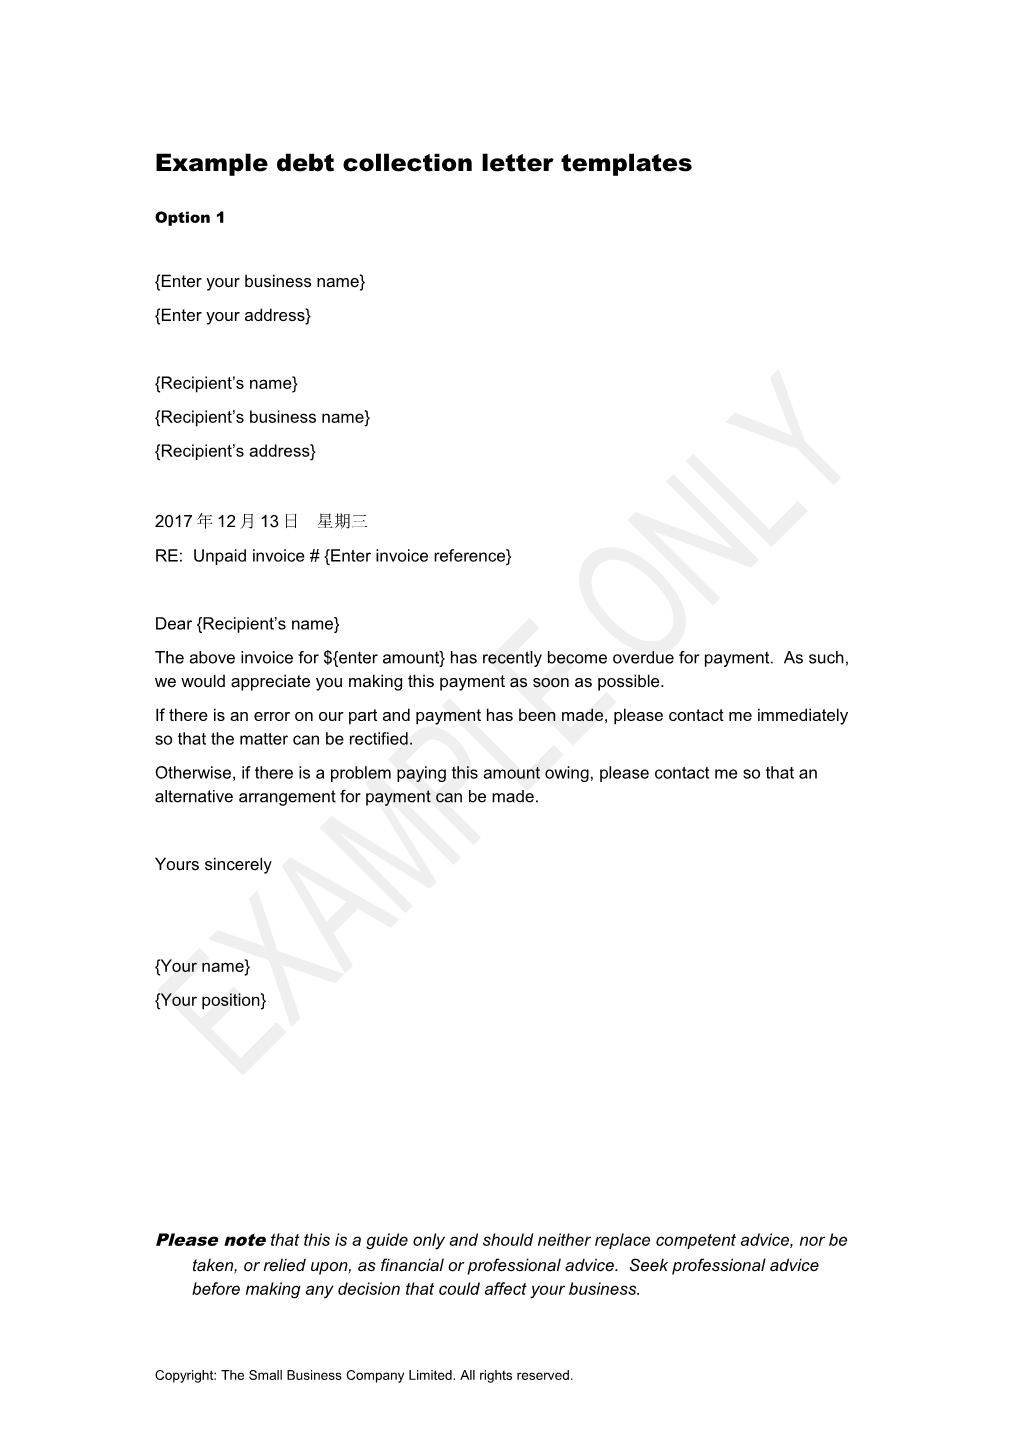 Example Debt Collection Letter Templates